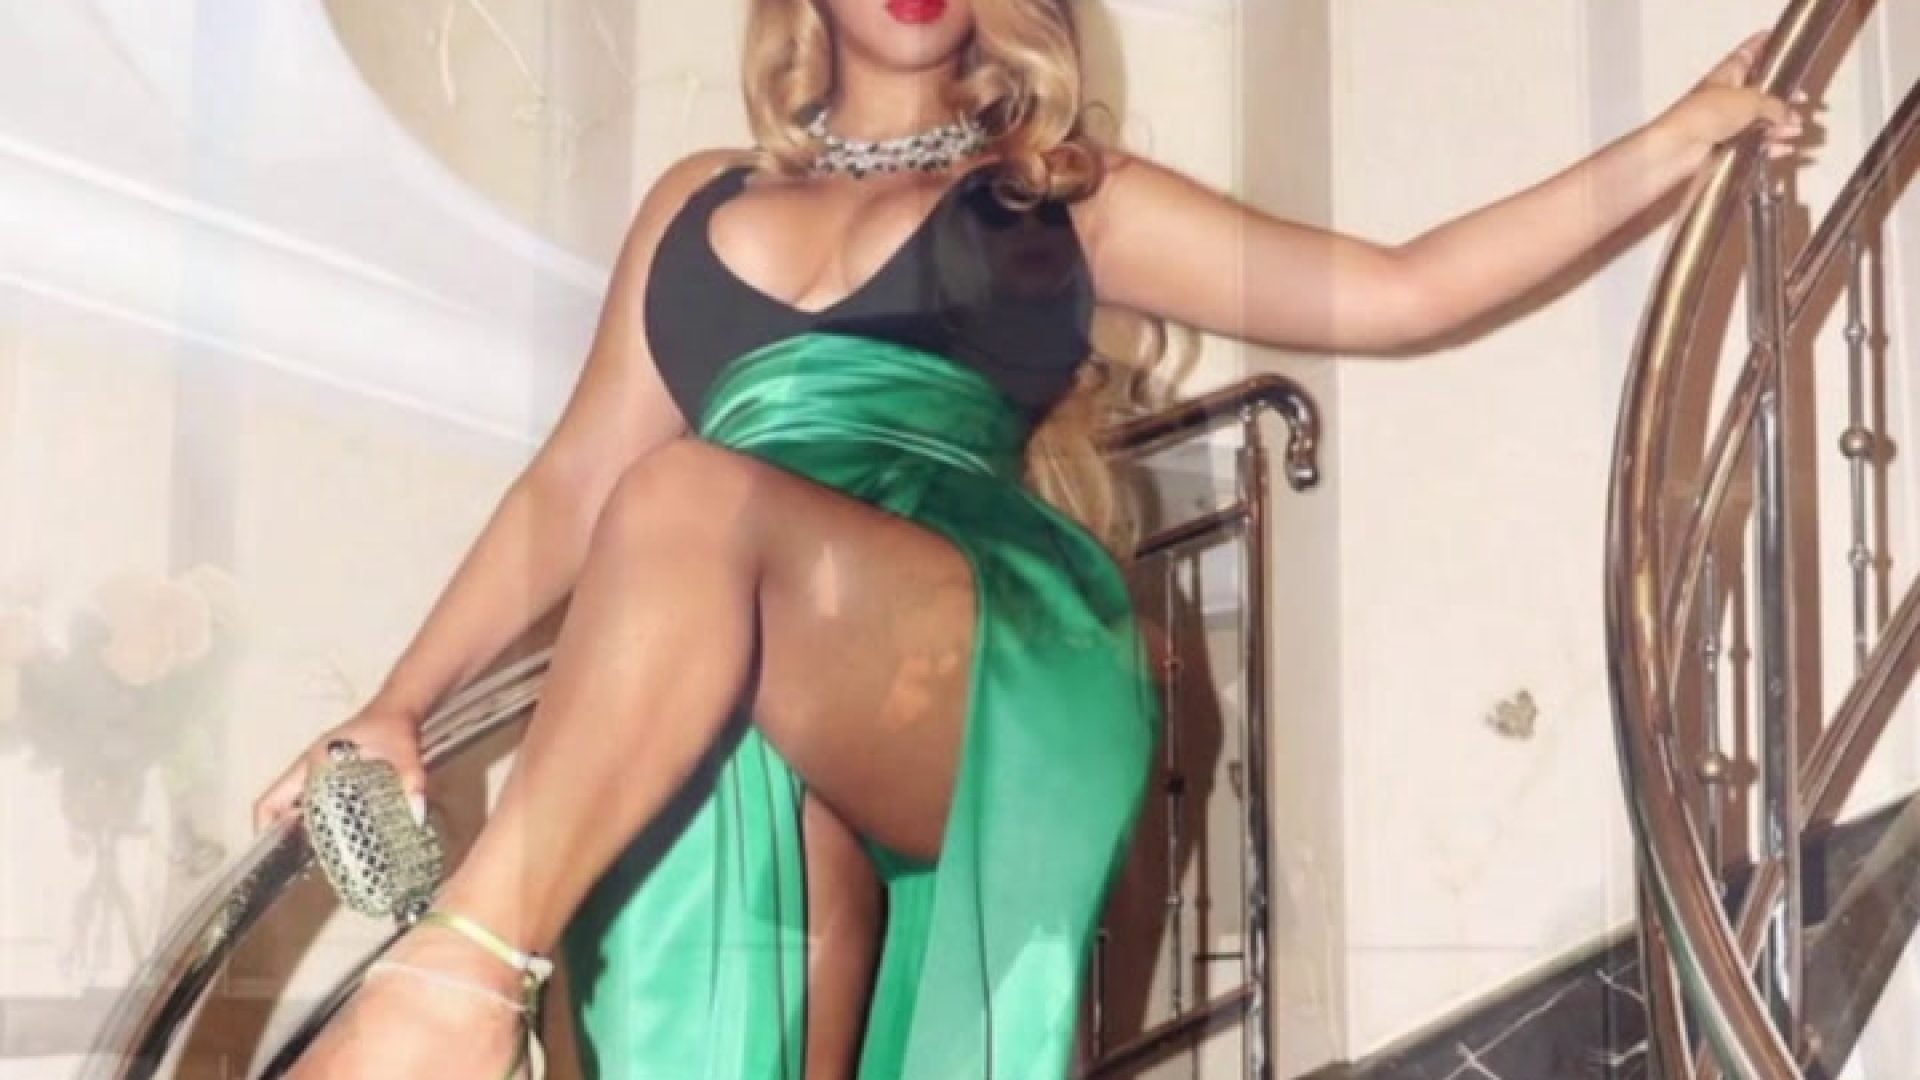 Beyoncé Shows The Girls How To Dress For Italy With Her Latest Outfits